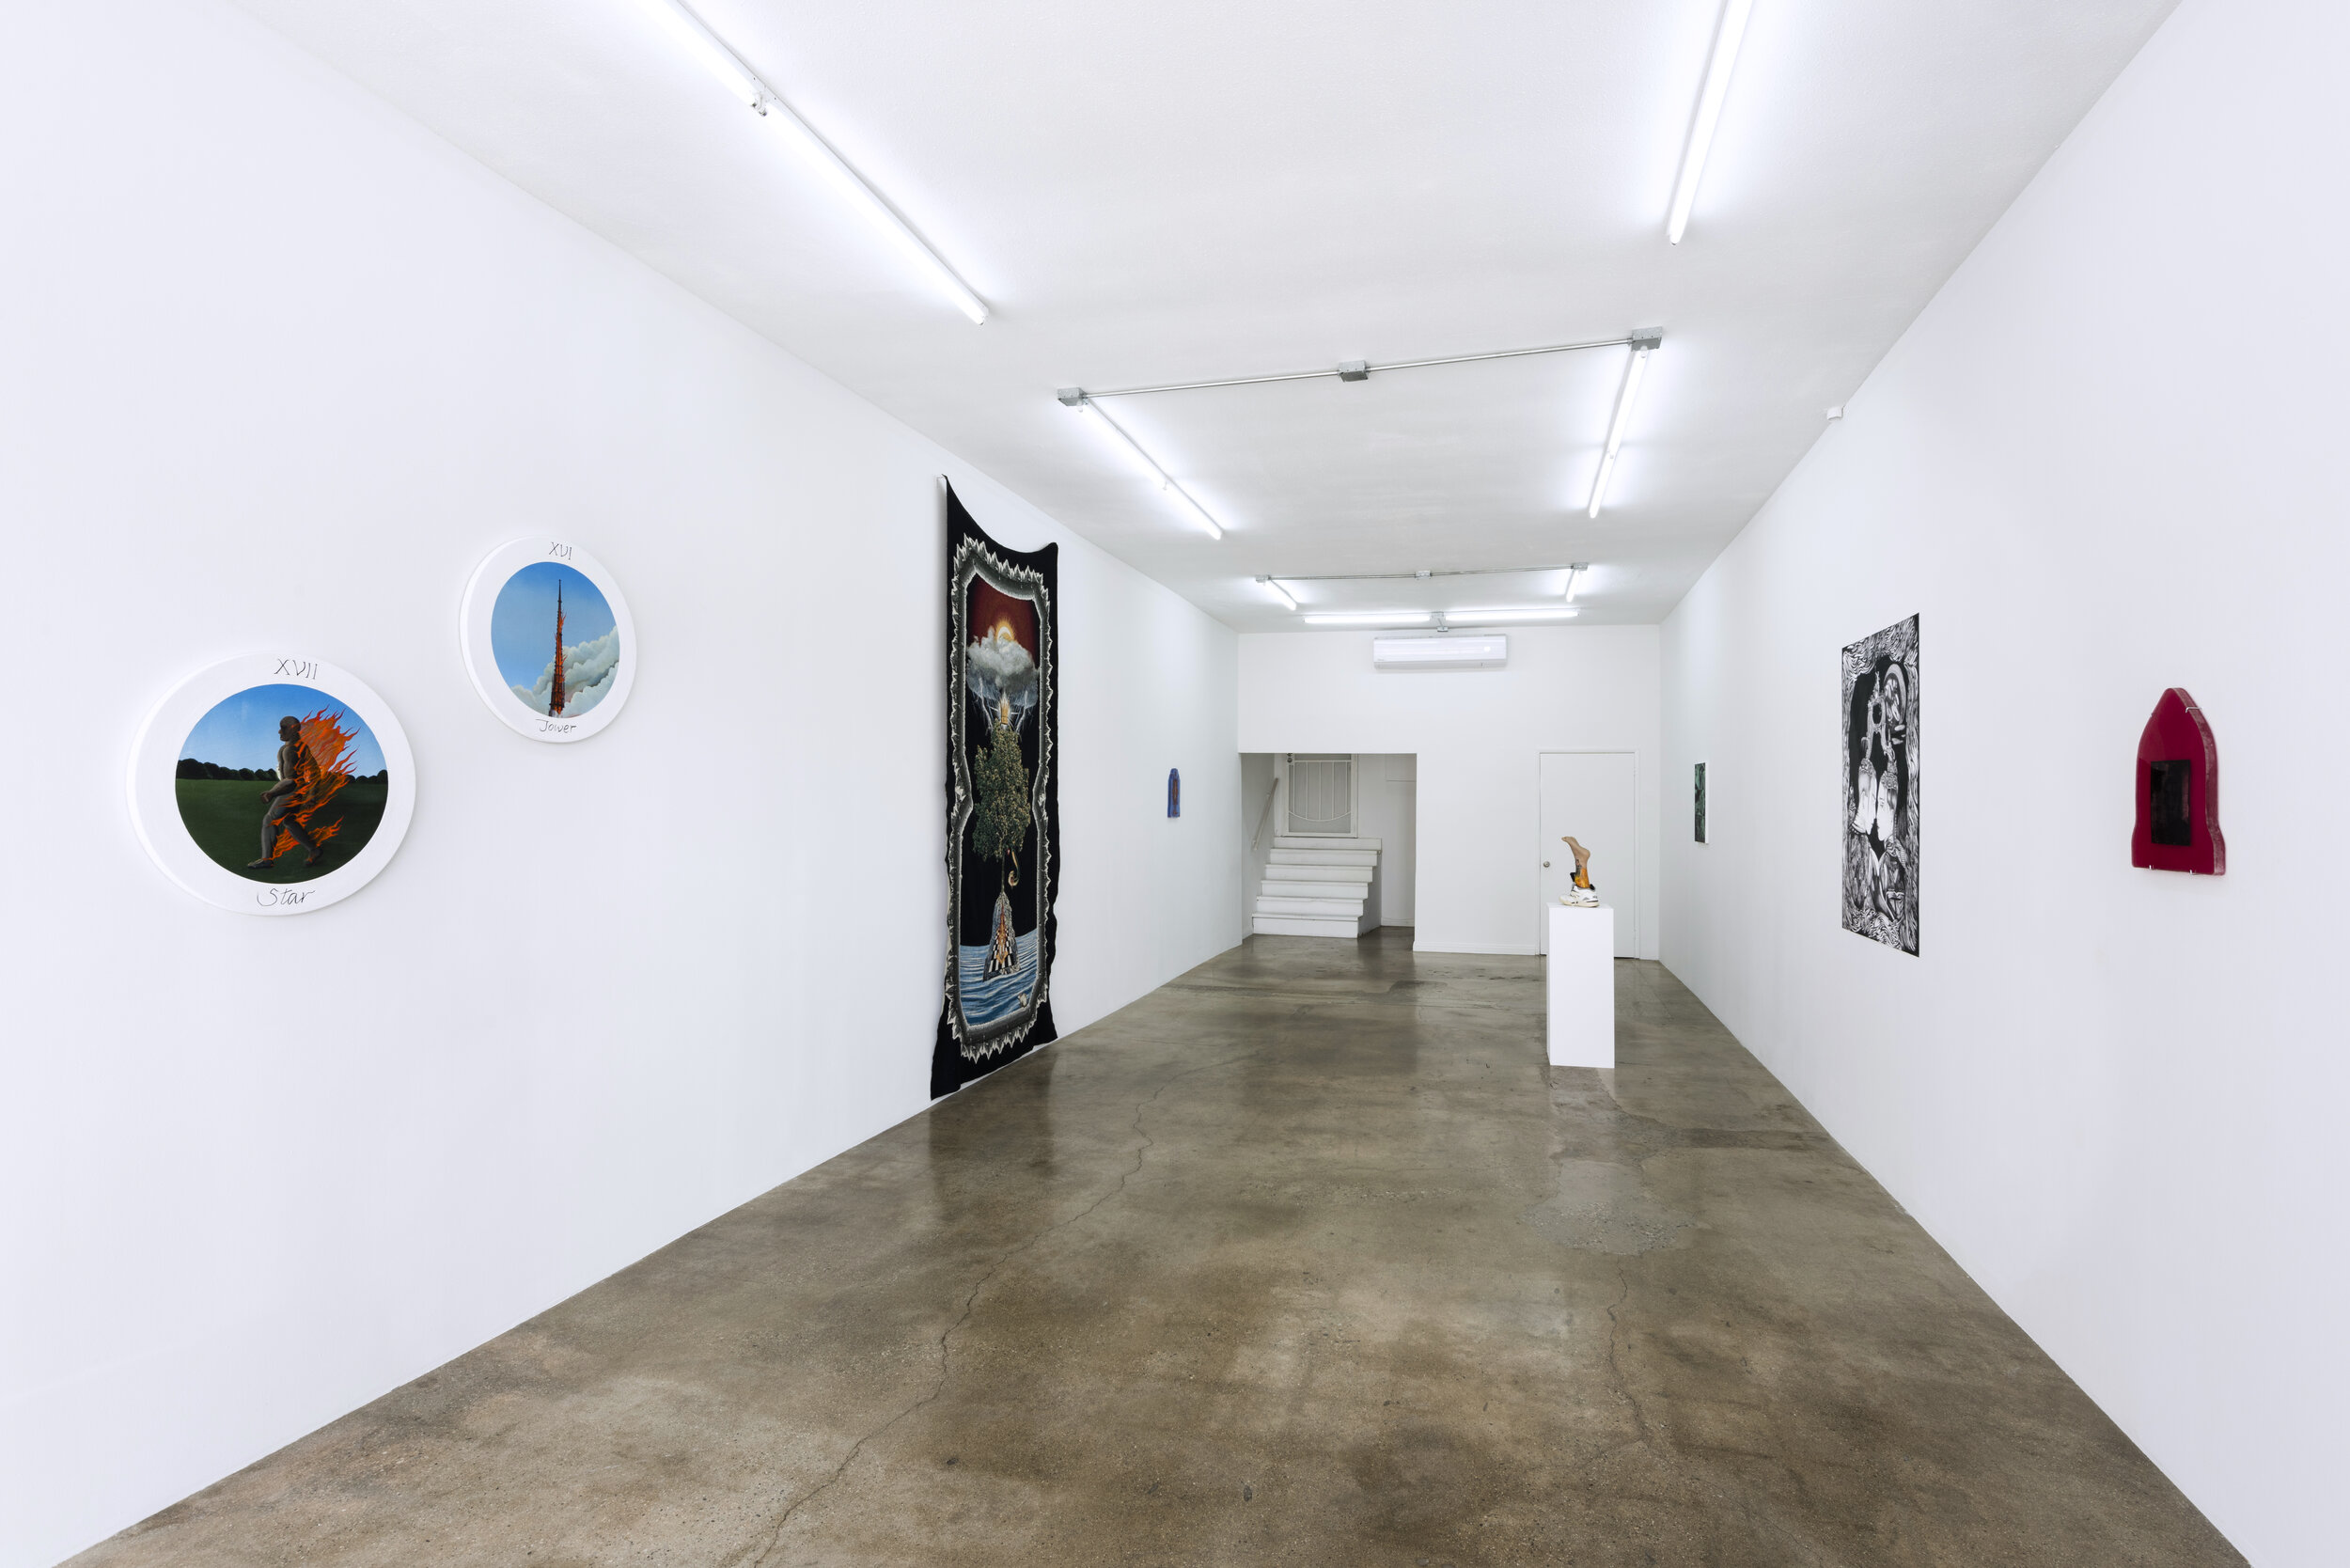  Installation view of  ”i’ll see you in the ether”  curated by Jonny Negron  November 10 - December 20, 2019  Photo by Ruben Diaz   Link to press release . 